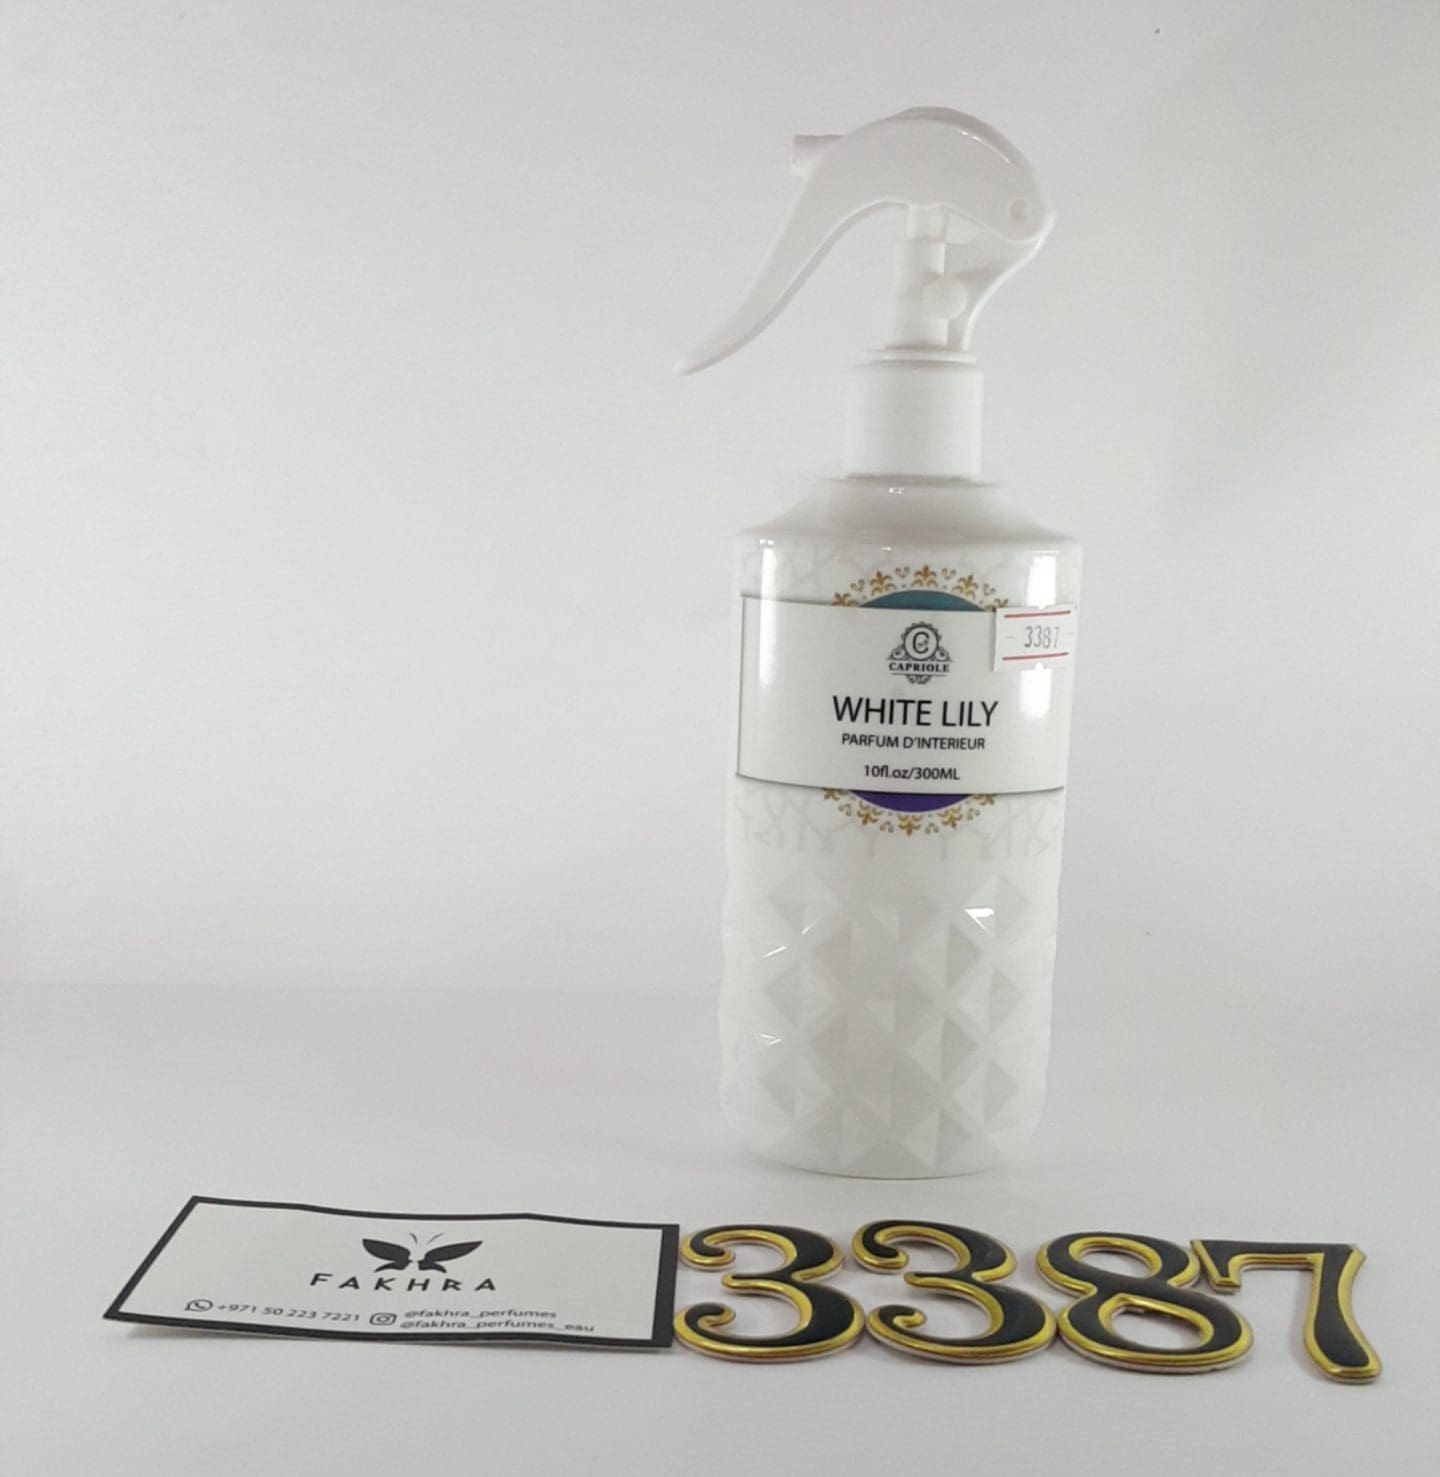 3387 Capriole WHITE LILY Home perfume 300ml